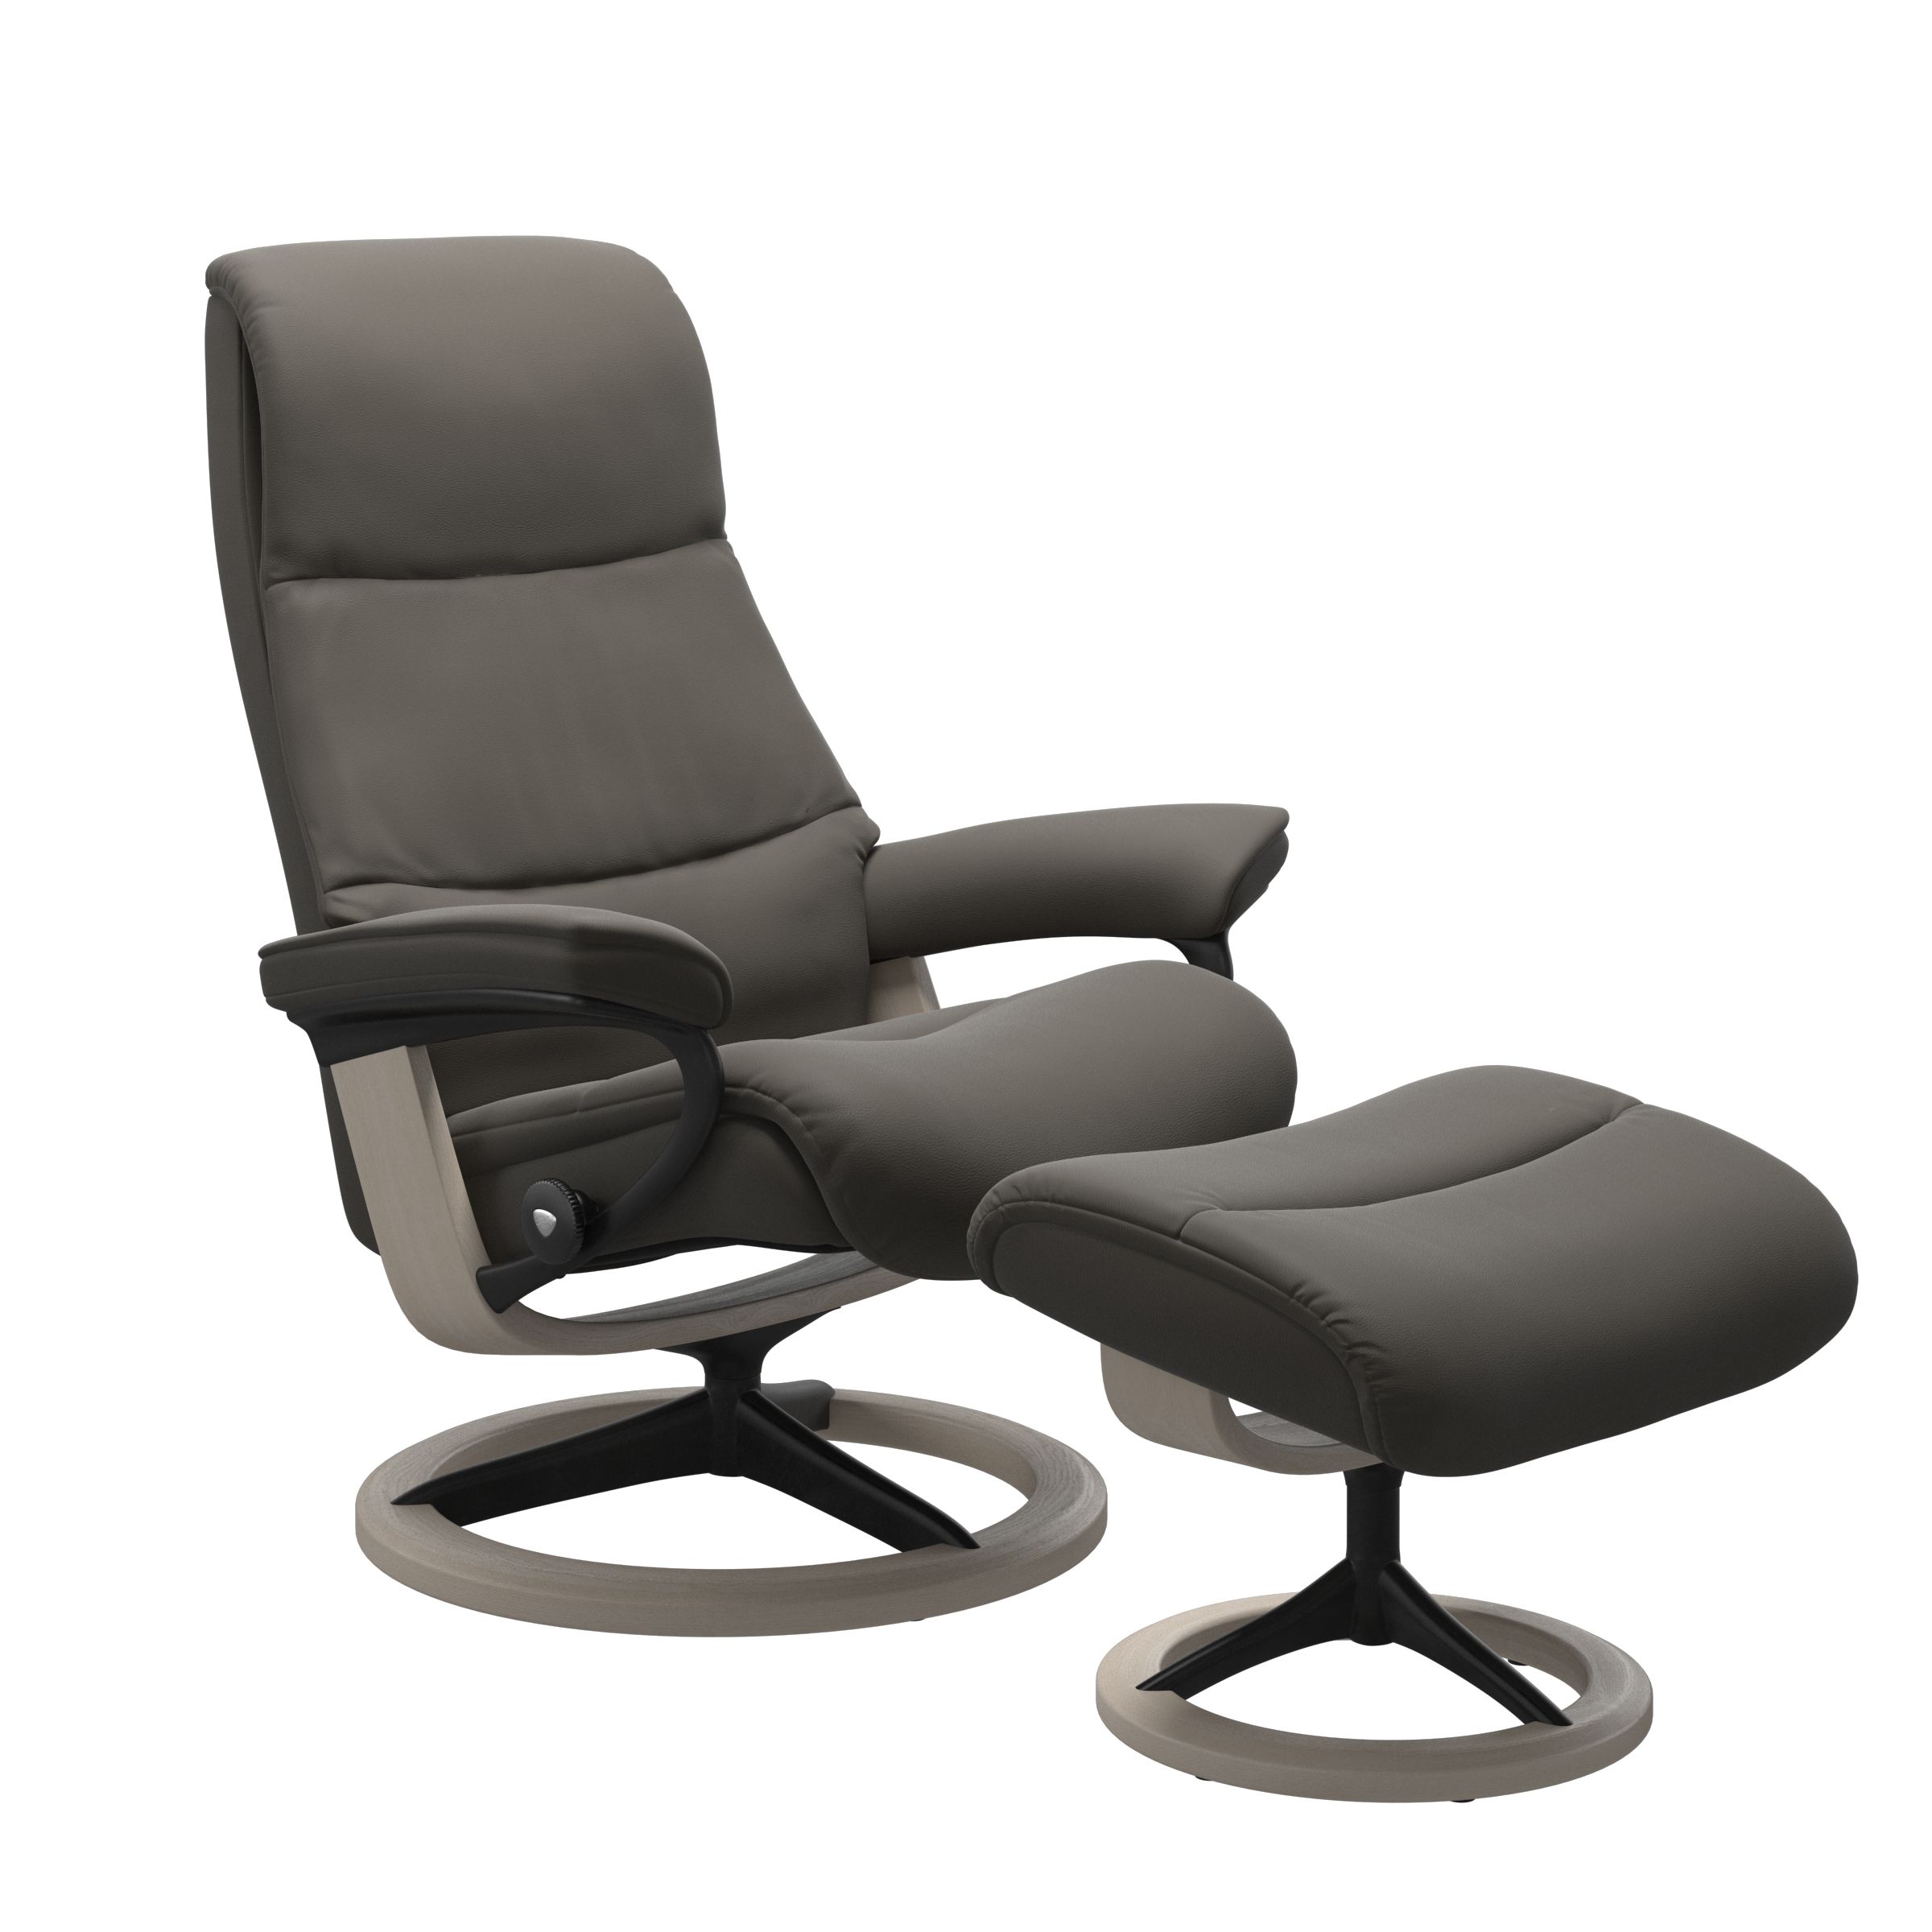 Stressless View Medium Recliner and Ottoman with Signature Base